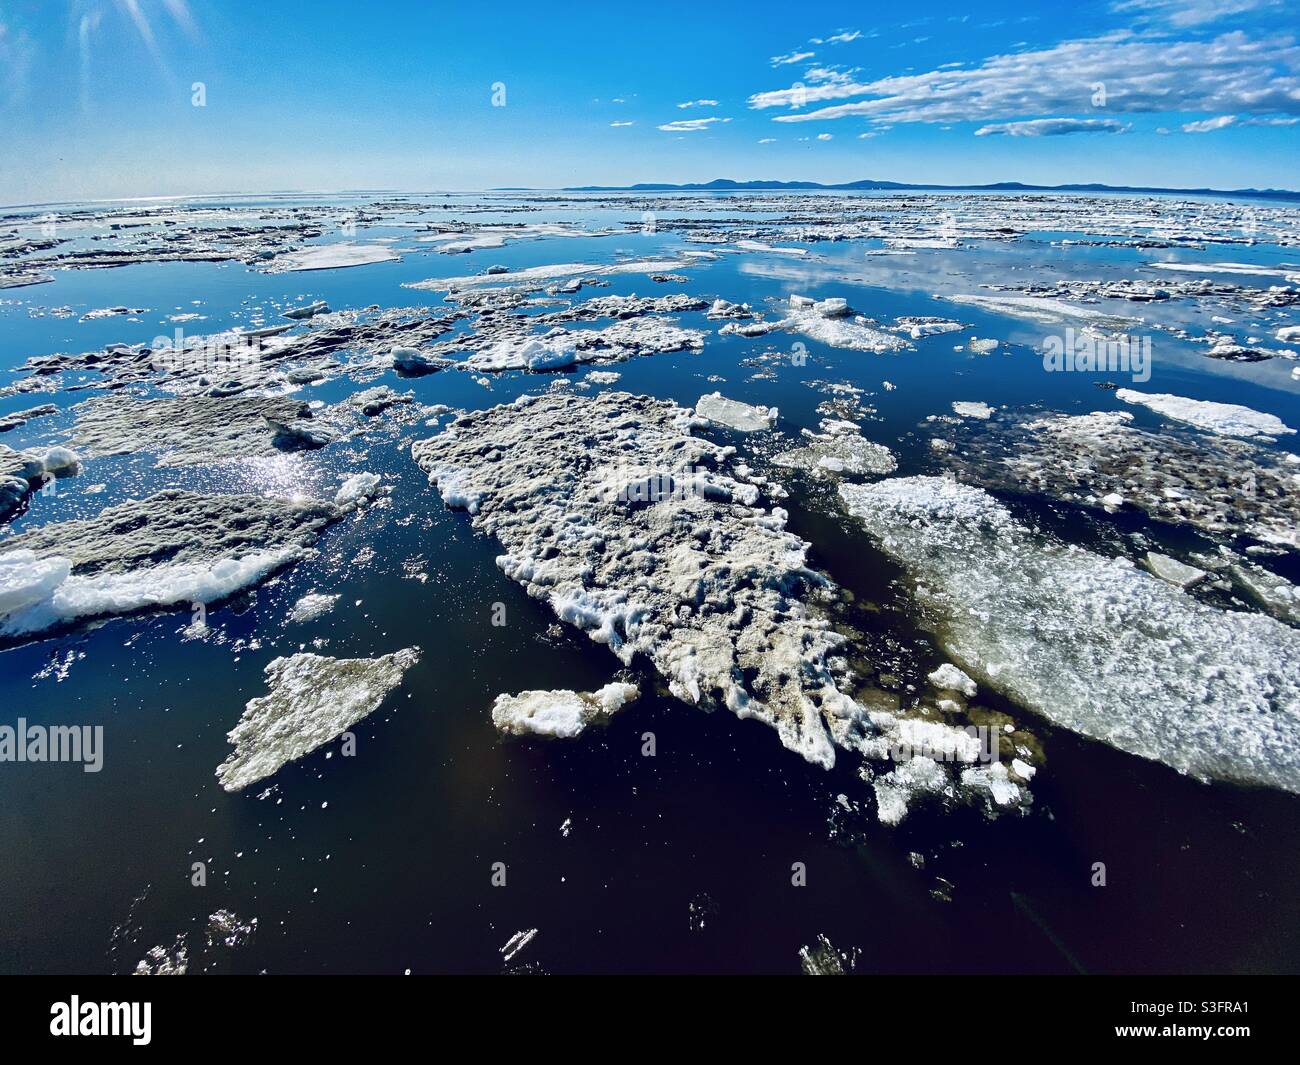 Melting ice floes in Kotzebue Sound from the annual spring break up of the sea and river ice in the Alaskan Arctic. Kotzebue, Alaska, USA Stock Photo